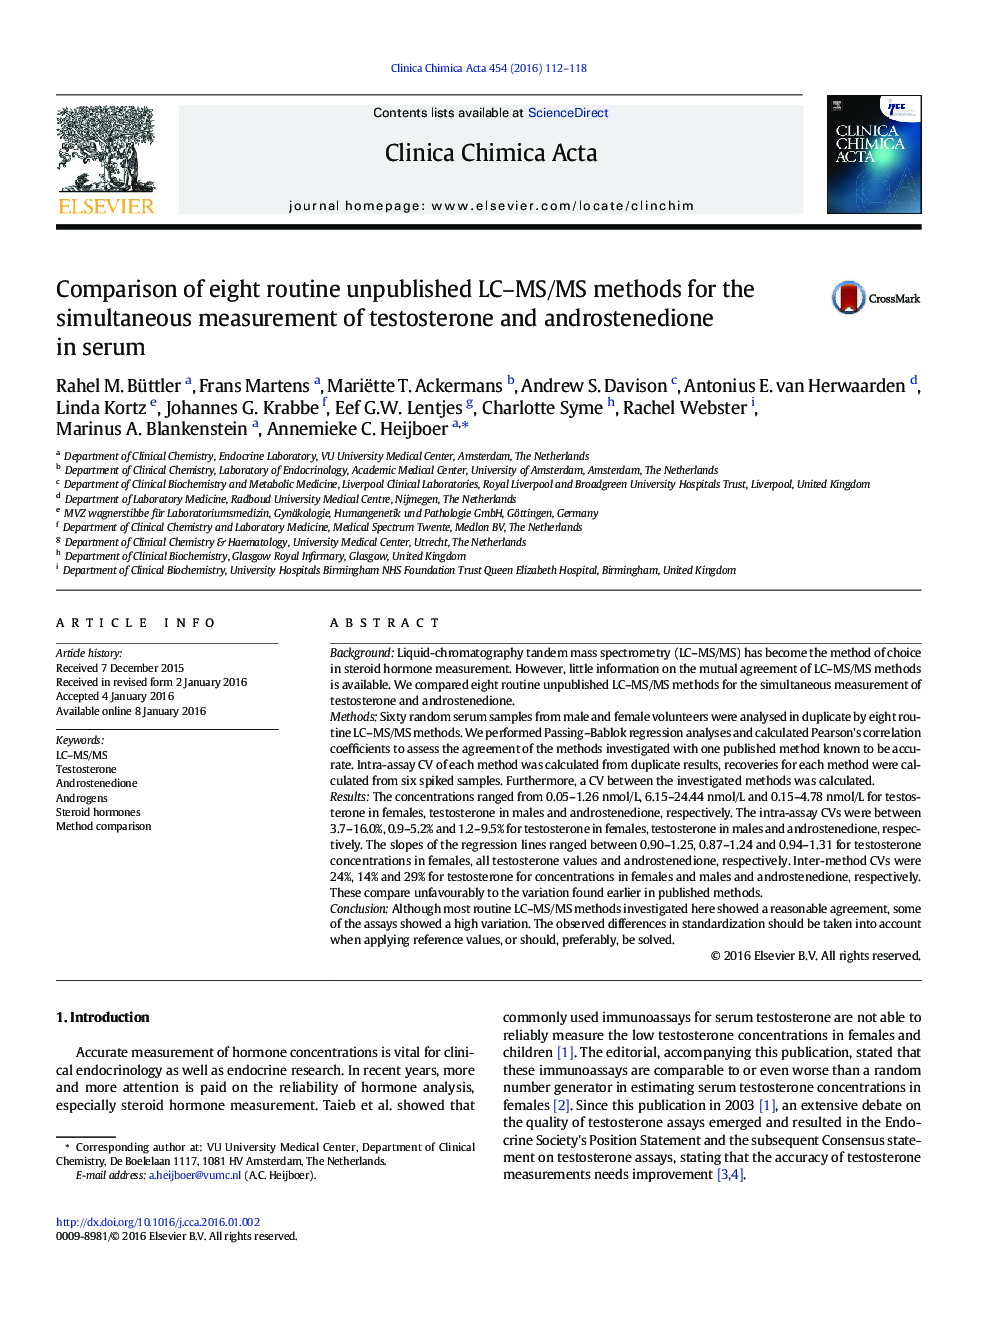 Comparison of eight routine unpublished LC–MS/MS methods for the simultaneous measurement of testosterone and androstenedione in serum